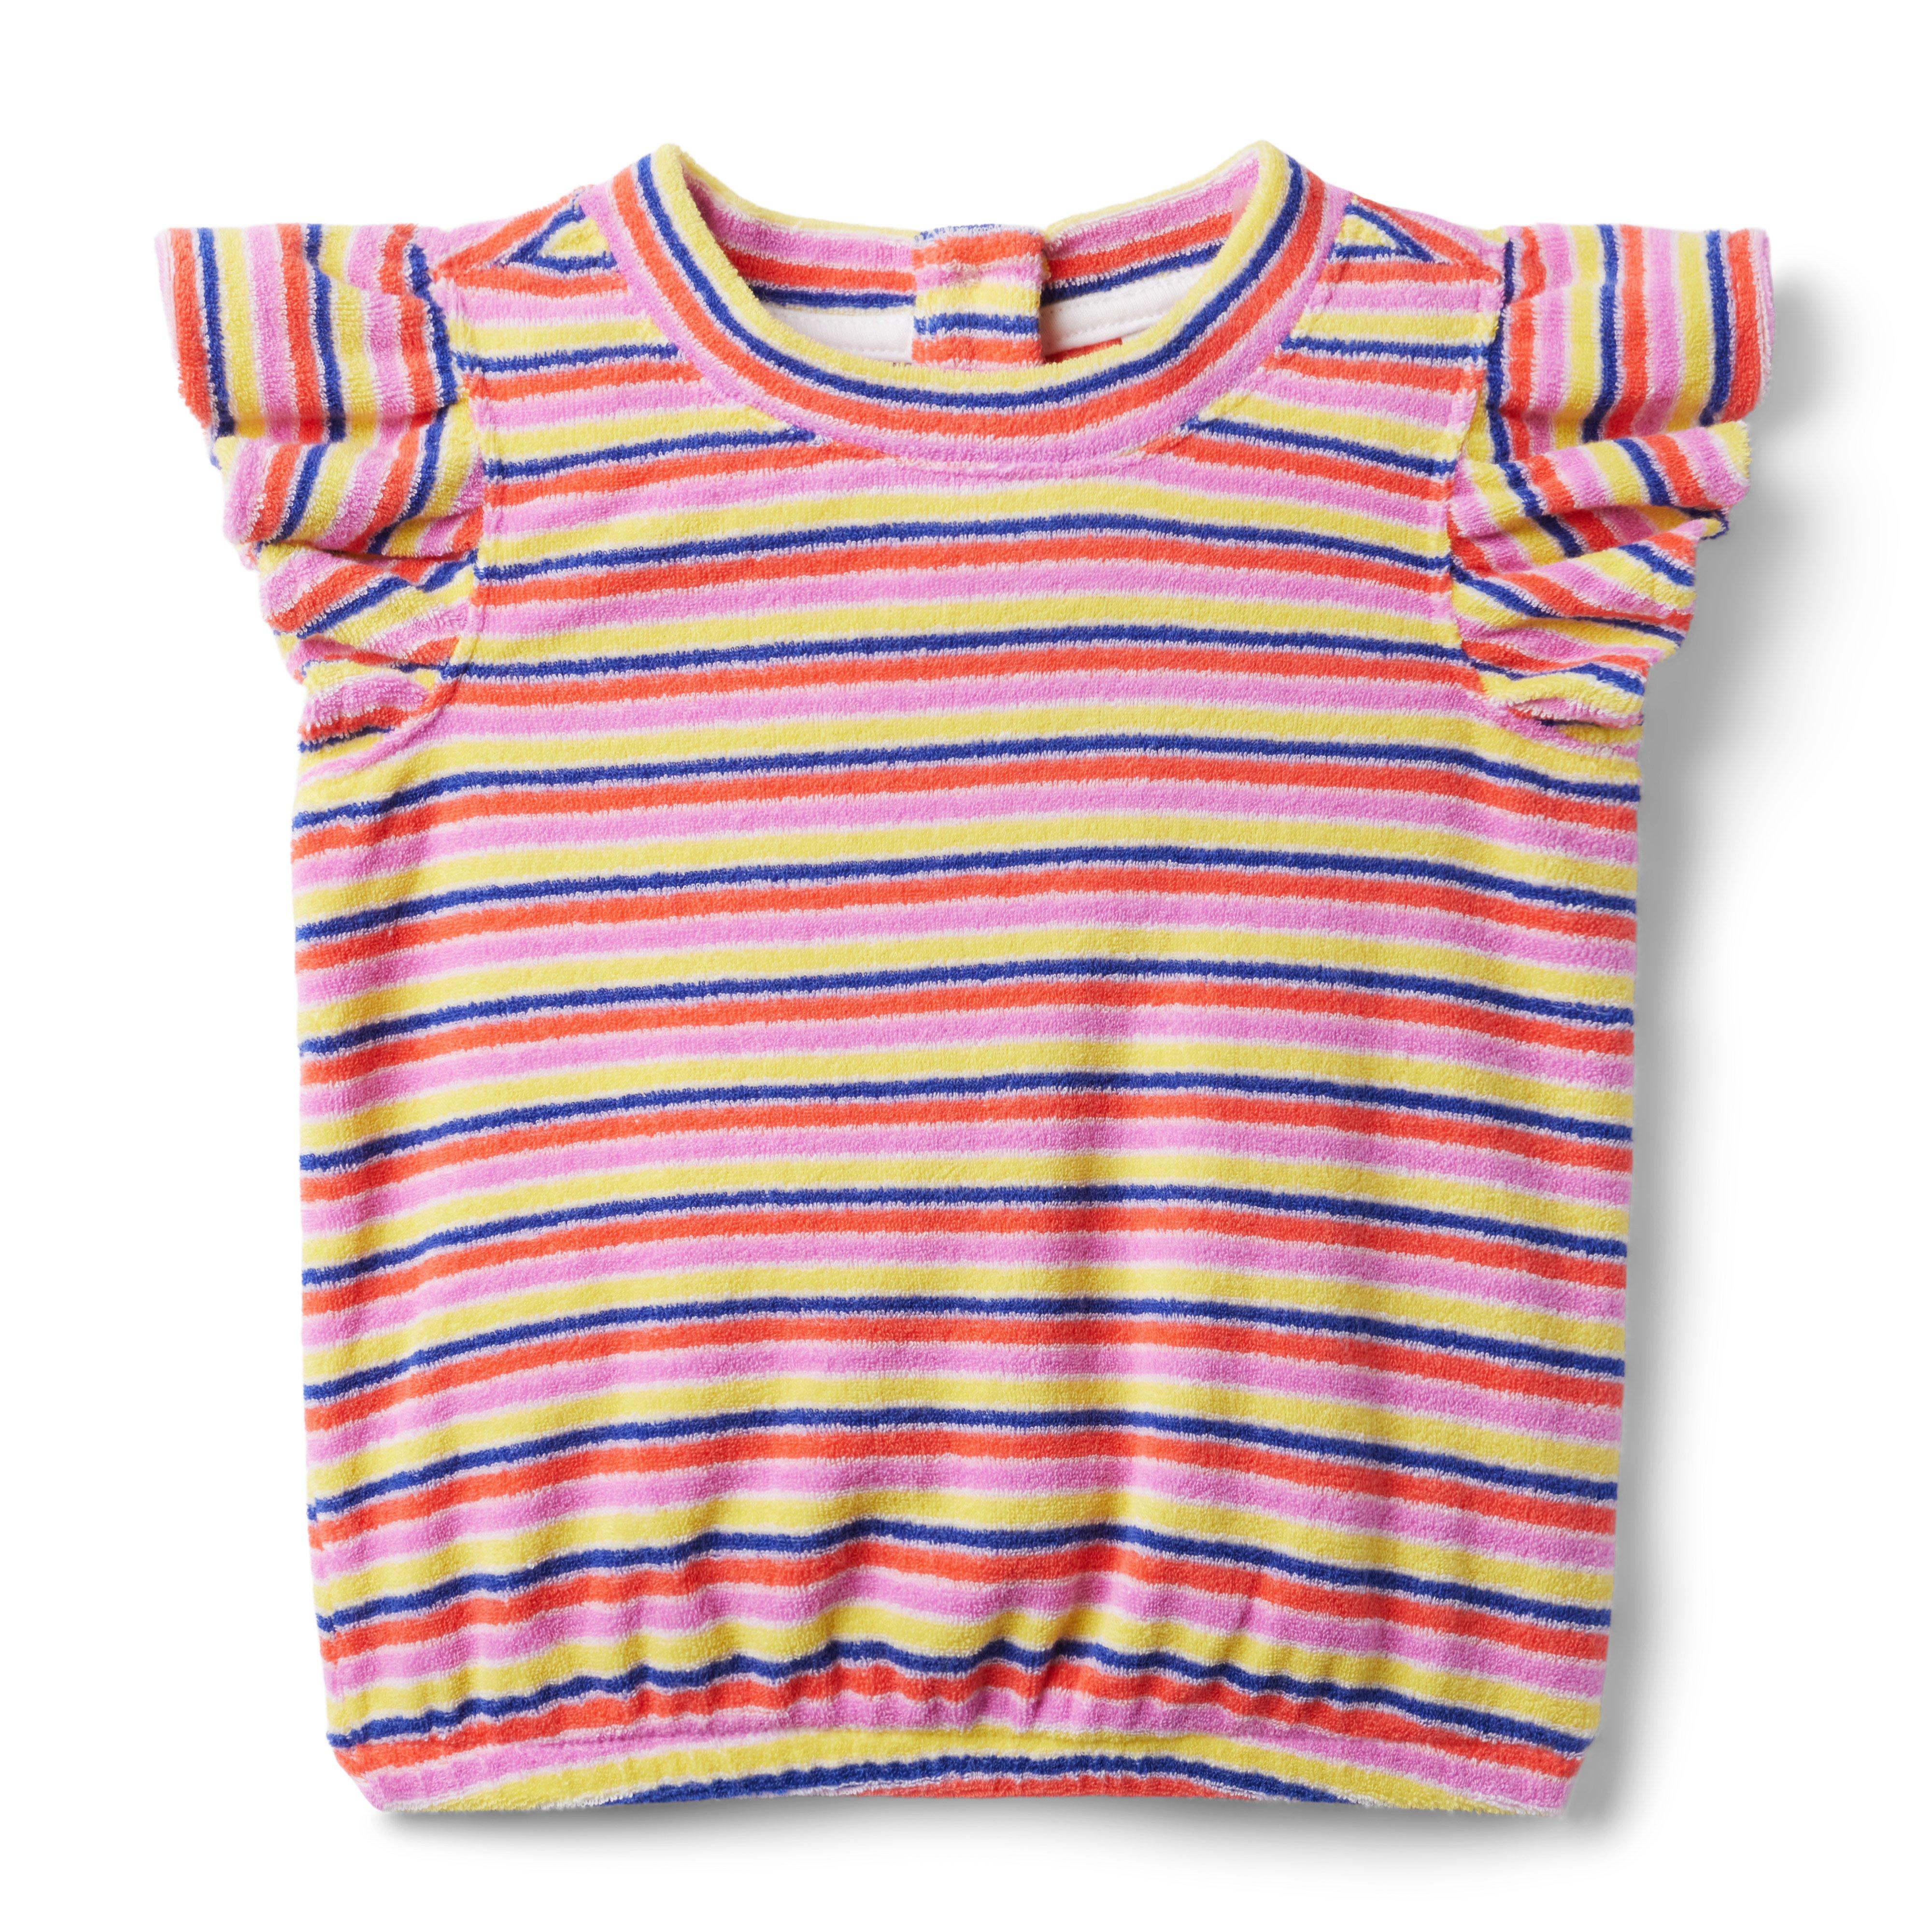 Kaavia James Striped Terry Top image number 0